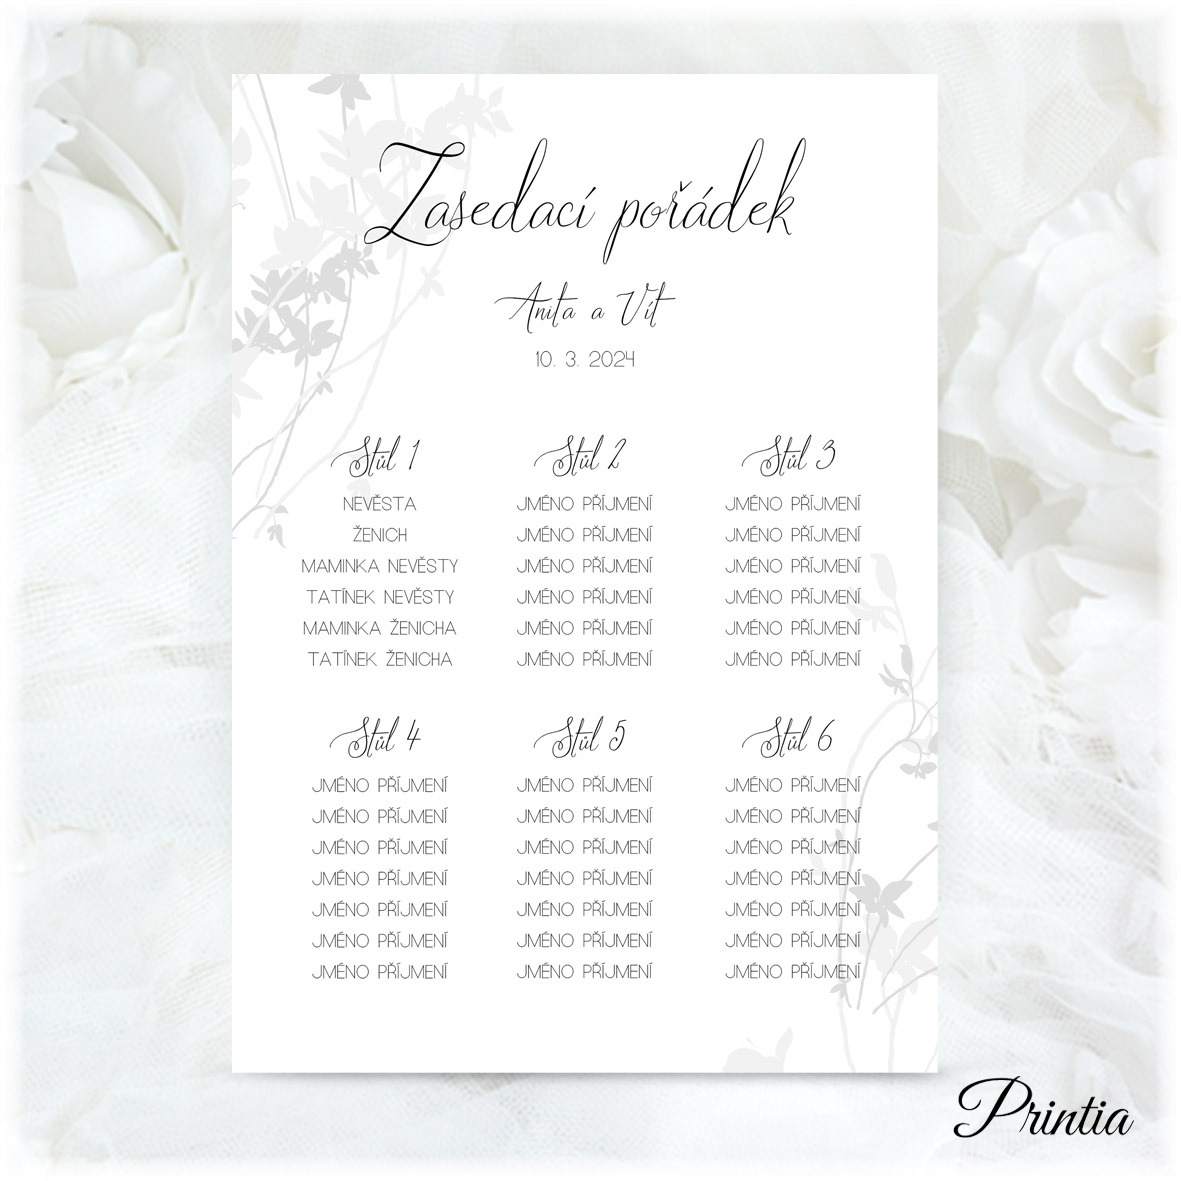 Wedding seating plan with floral ornament